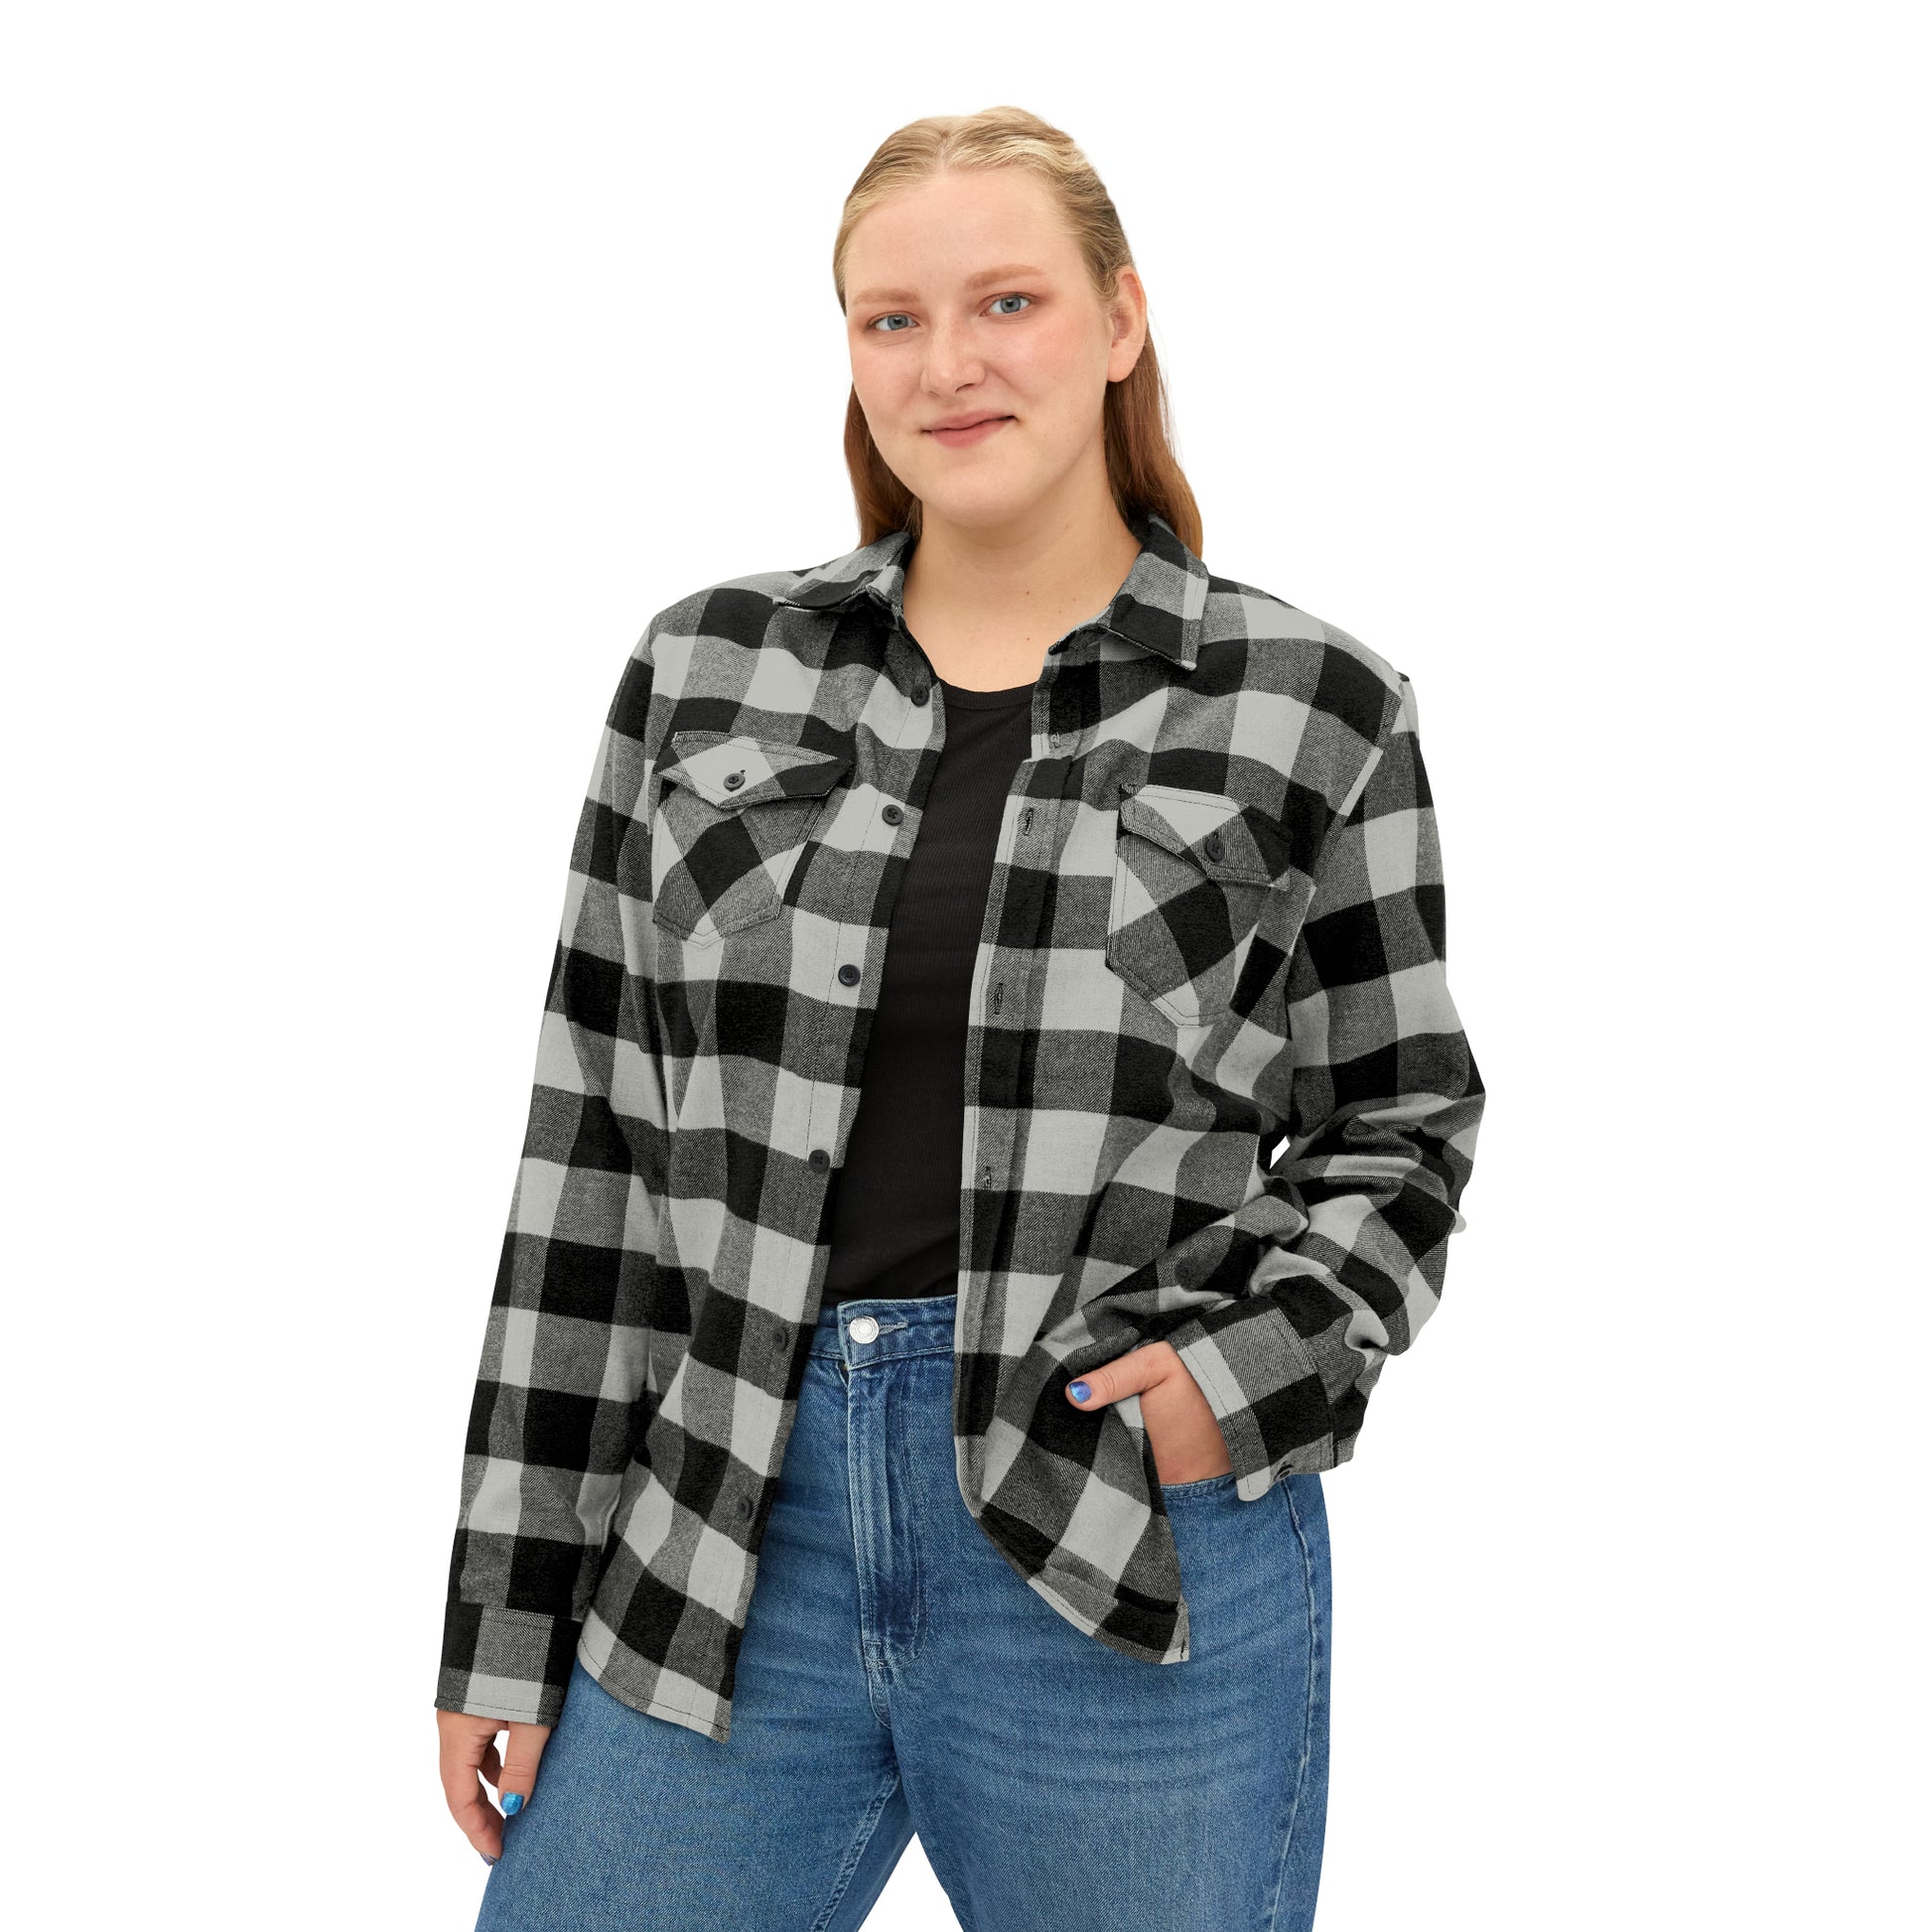 Sentence with product name and brand name: A woman wearing a Printify Unisex Flannel Shirt in black and white.